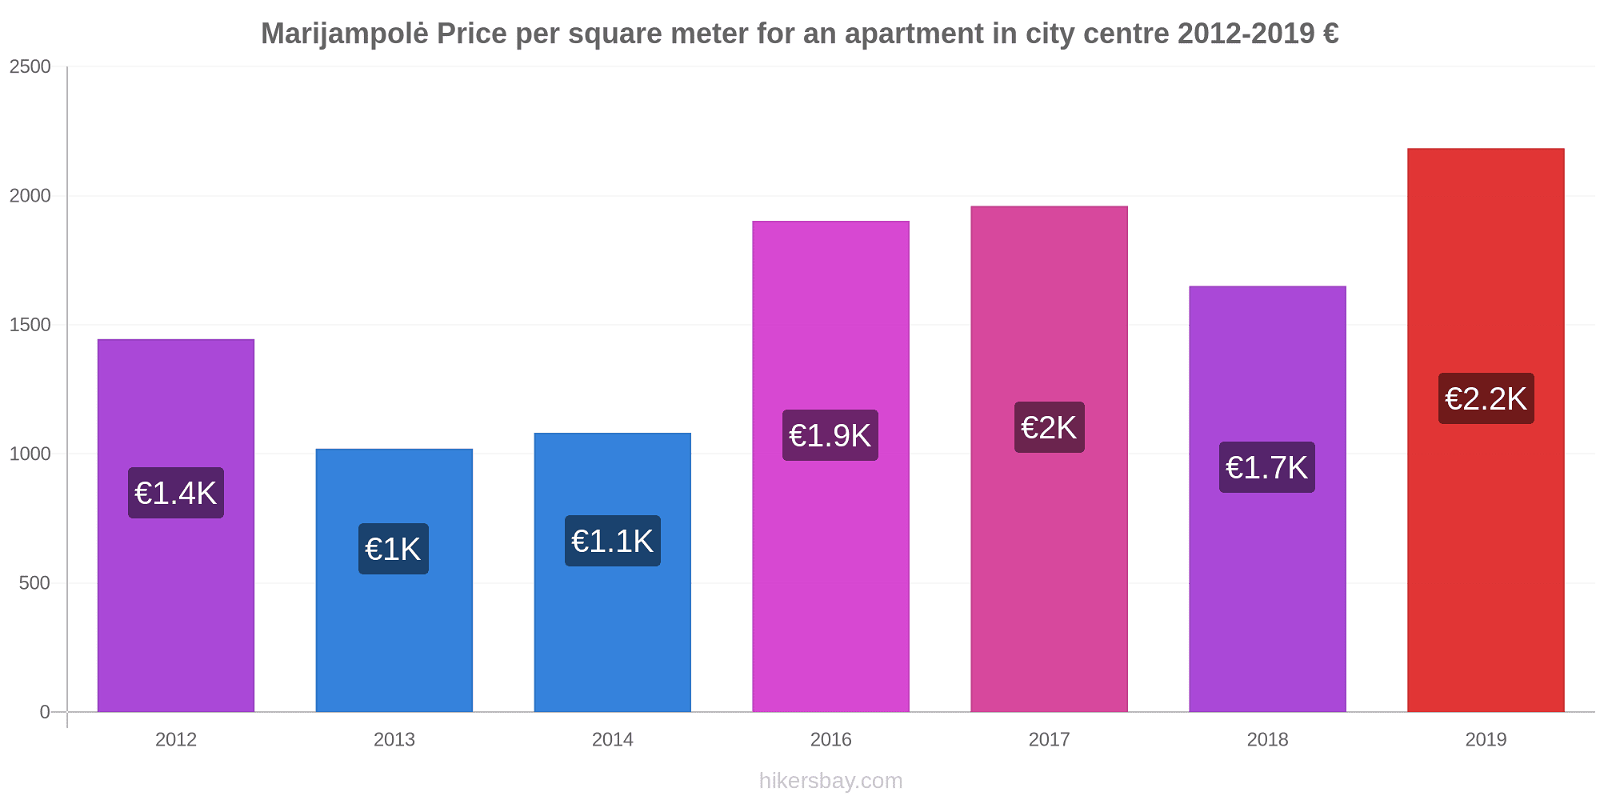 Marijampolė price changes Price per square meter for an apartment in city centre hikersbay.com